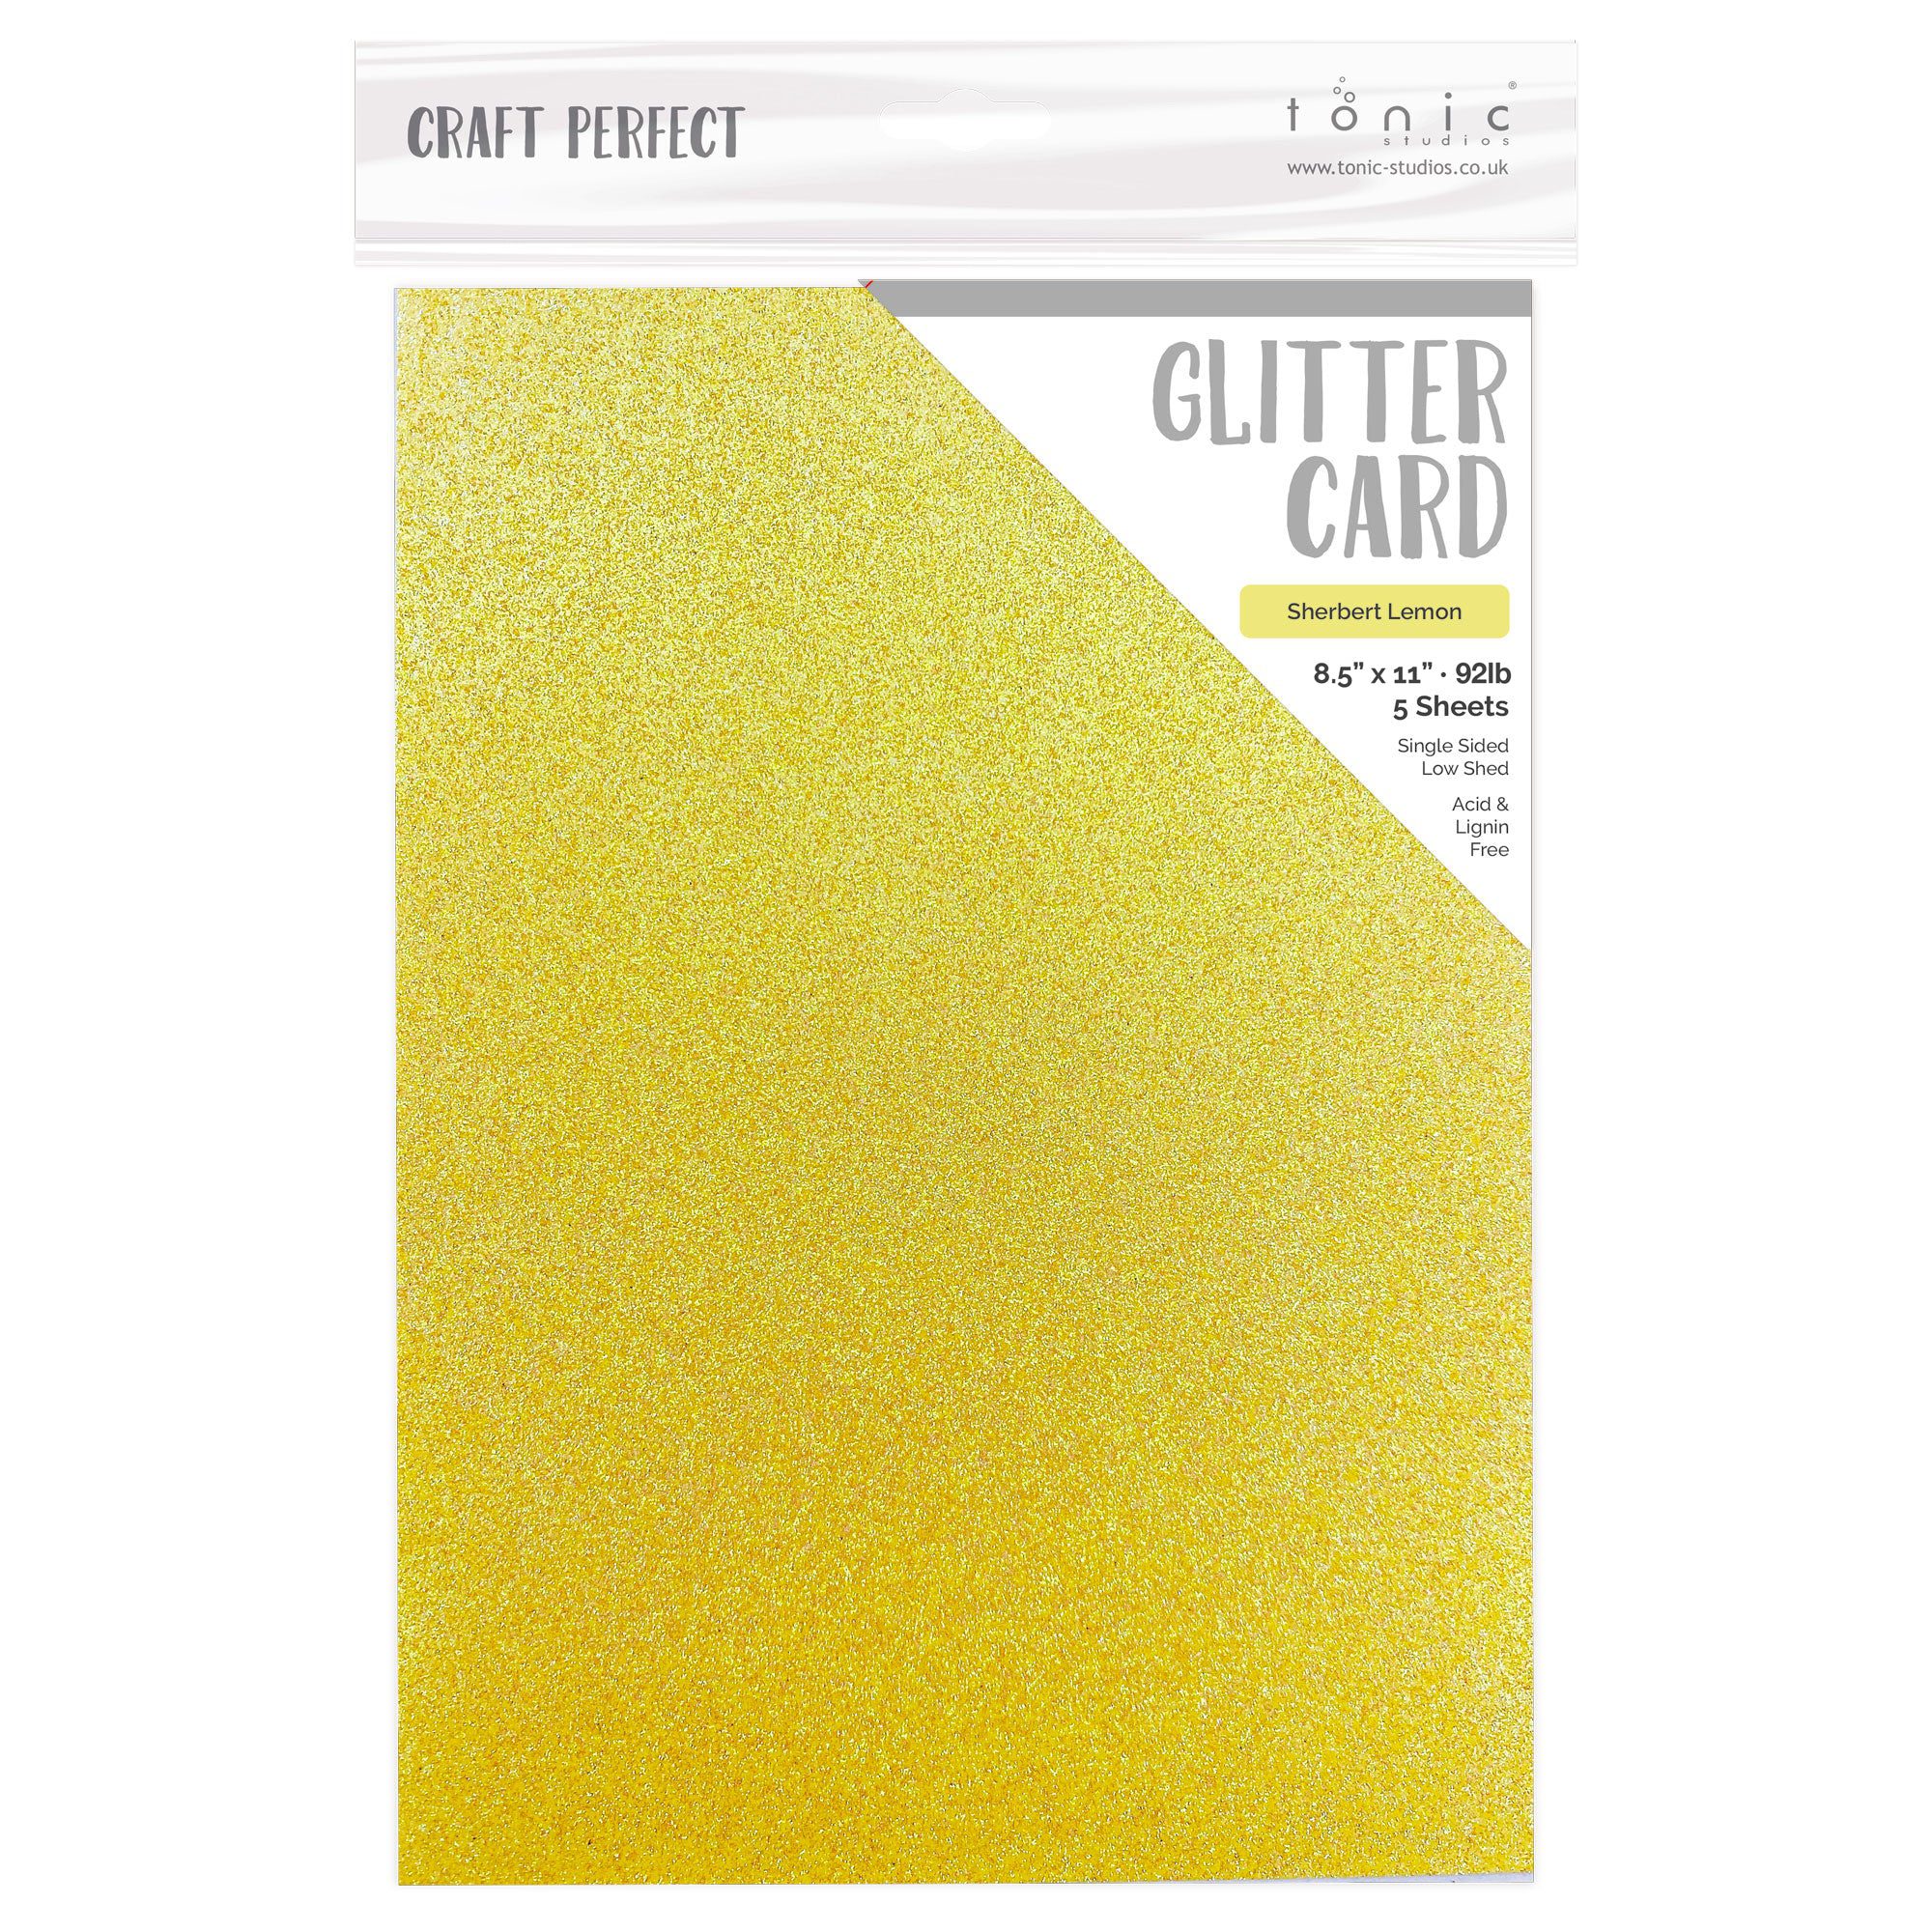 Layering Glitter Cardstock – Time Out Challenge